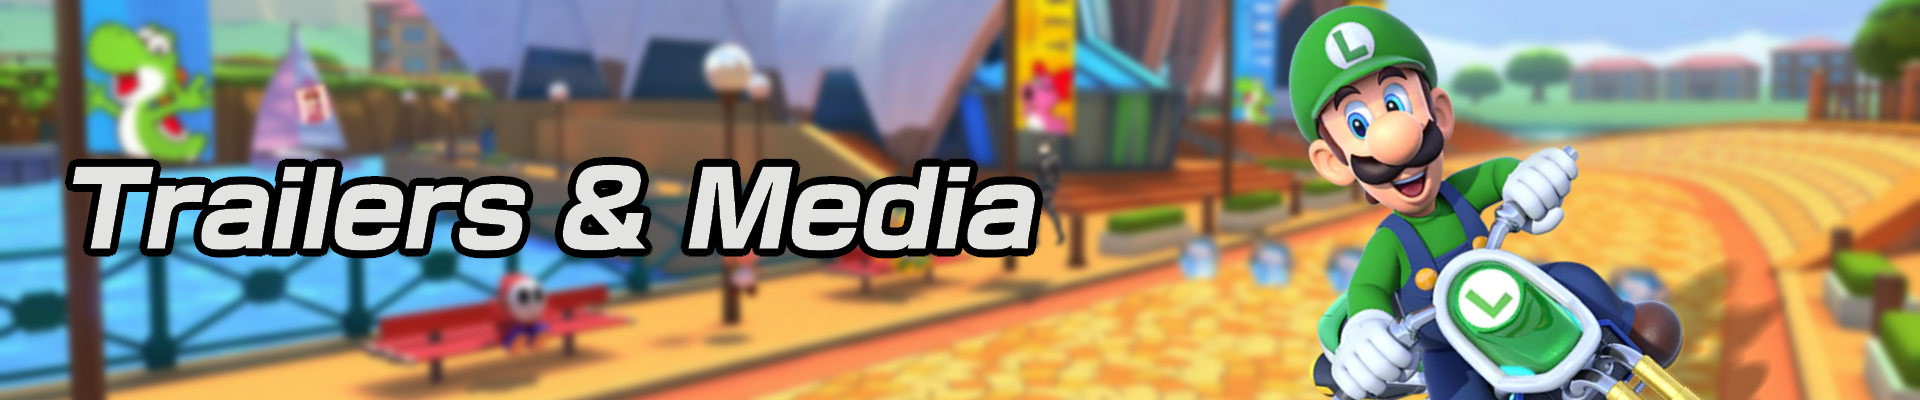 Trailers-Media-Wave2.png